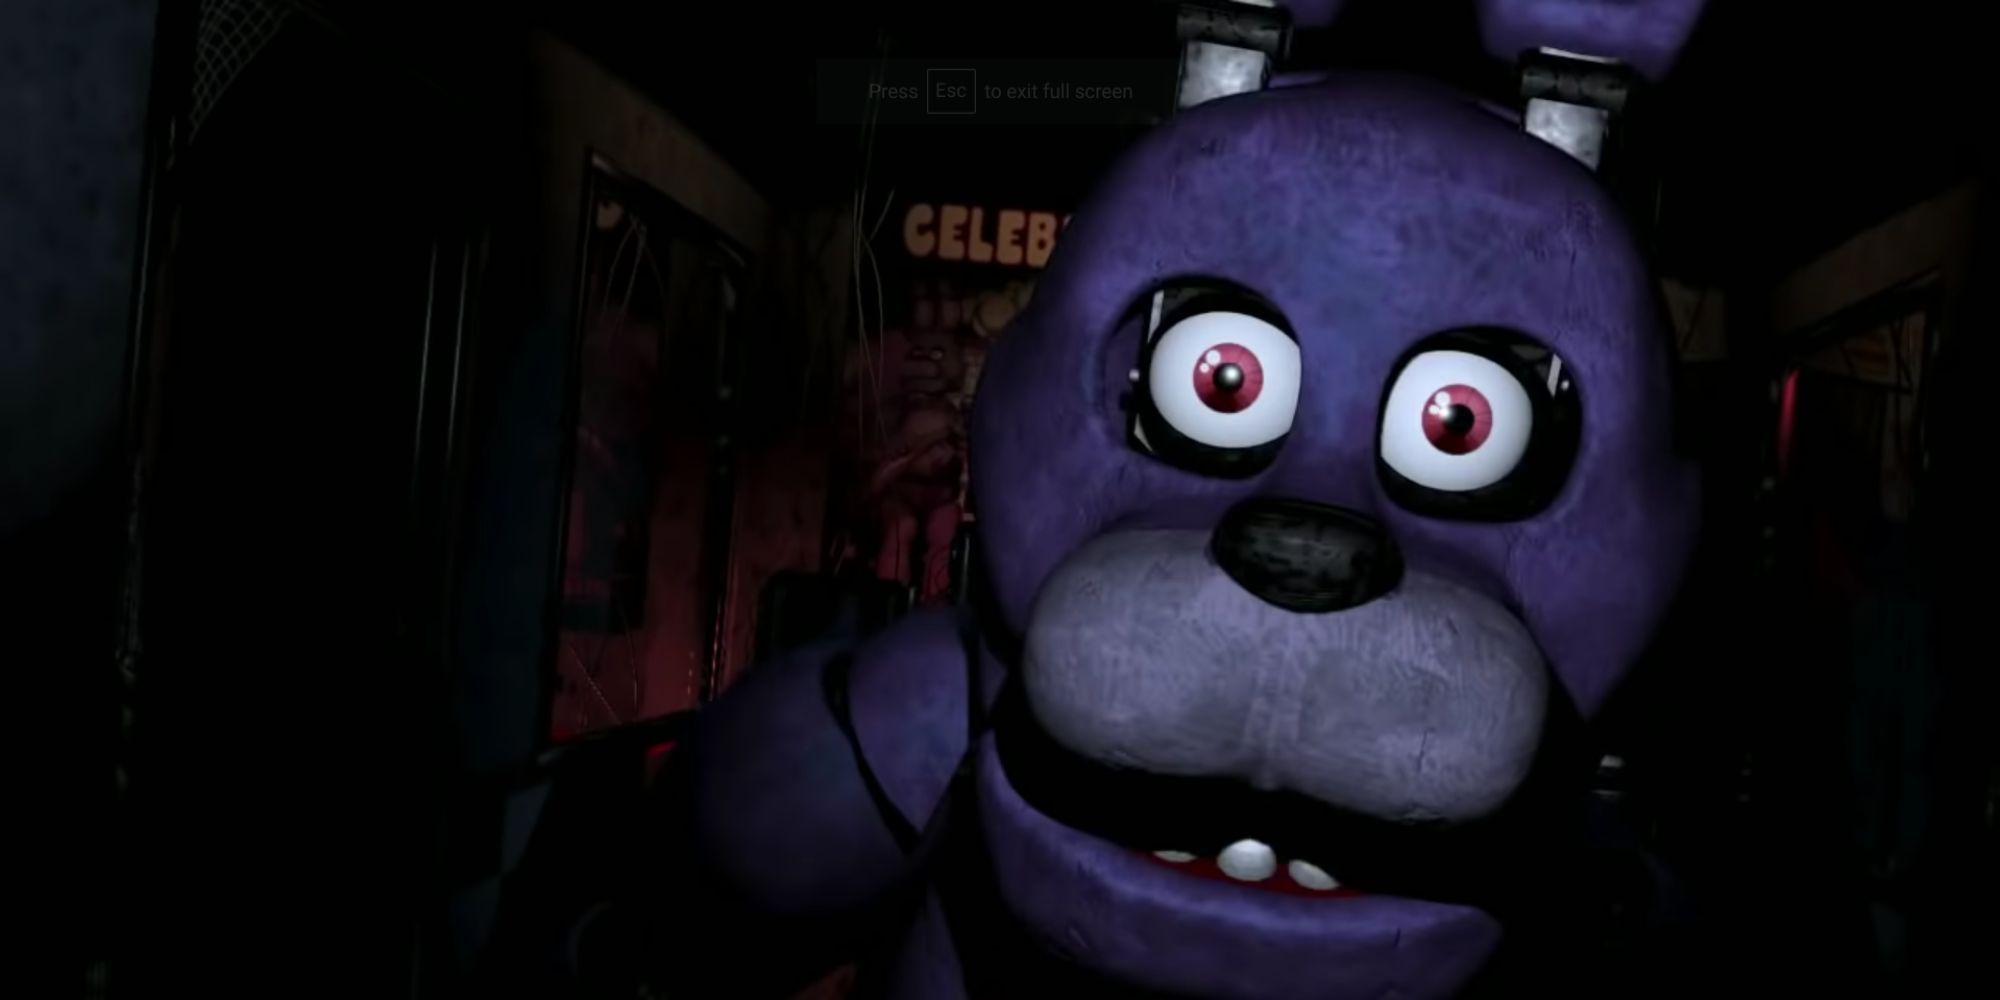 Bonnie jumpscaring the player in Five Nights at Freddy's.